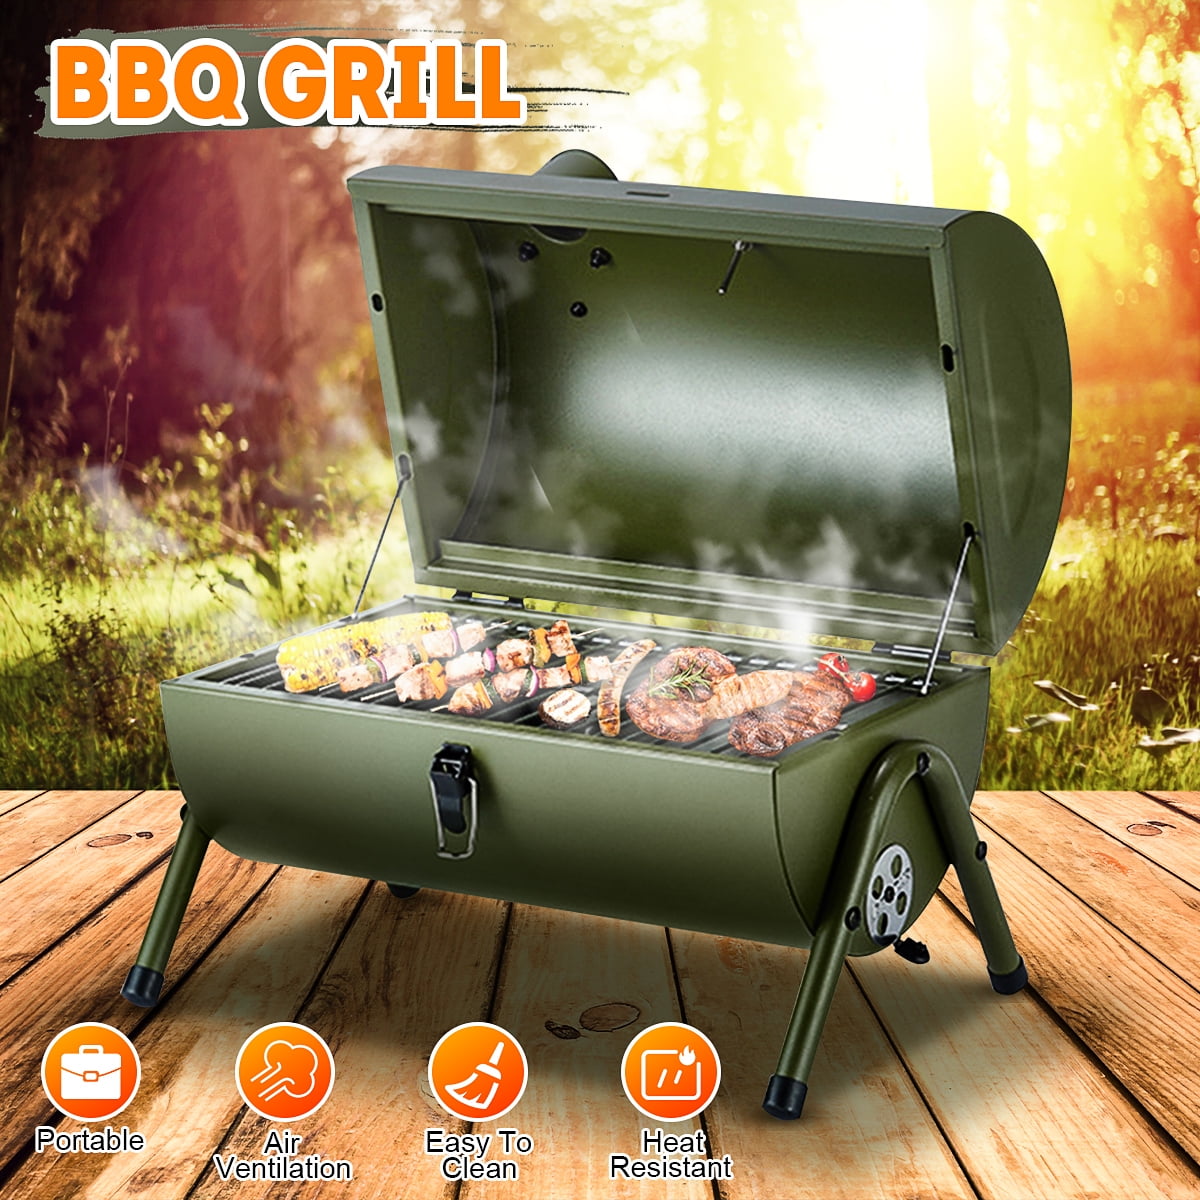 Tailgating & Travel Broil Optimized Portable Charcoal Grill Smoker RED Barbecue for Camping Smoke or Hibachi Go Anywhere With This Tabletop Outdoor BBQ Cooker and Char-Grill Raptor Grilling